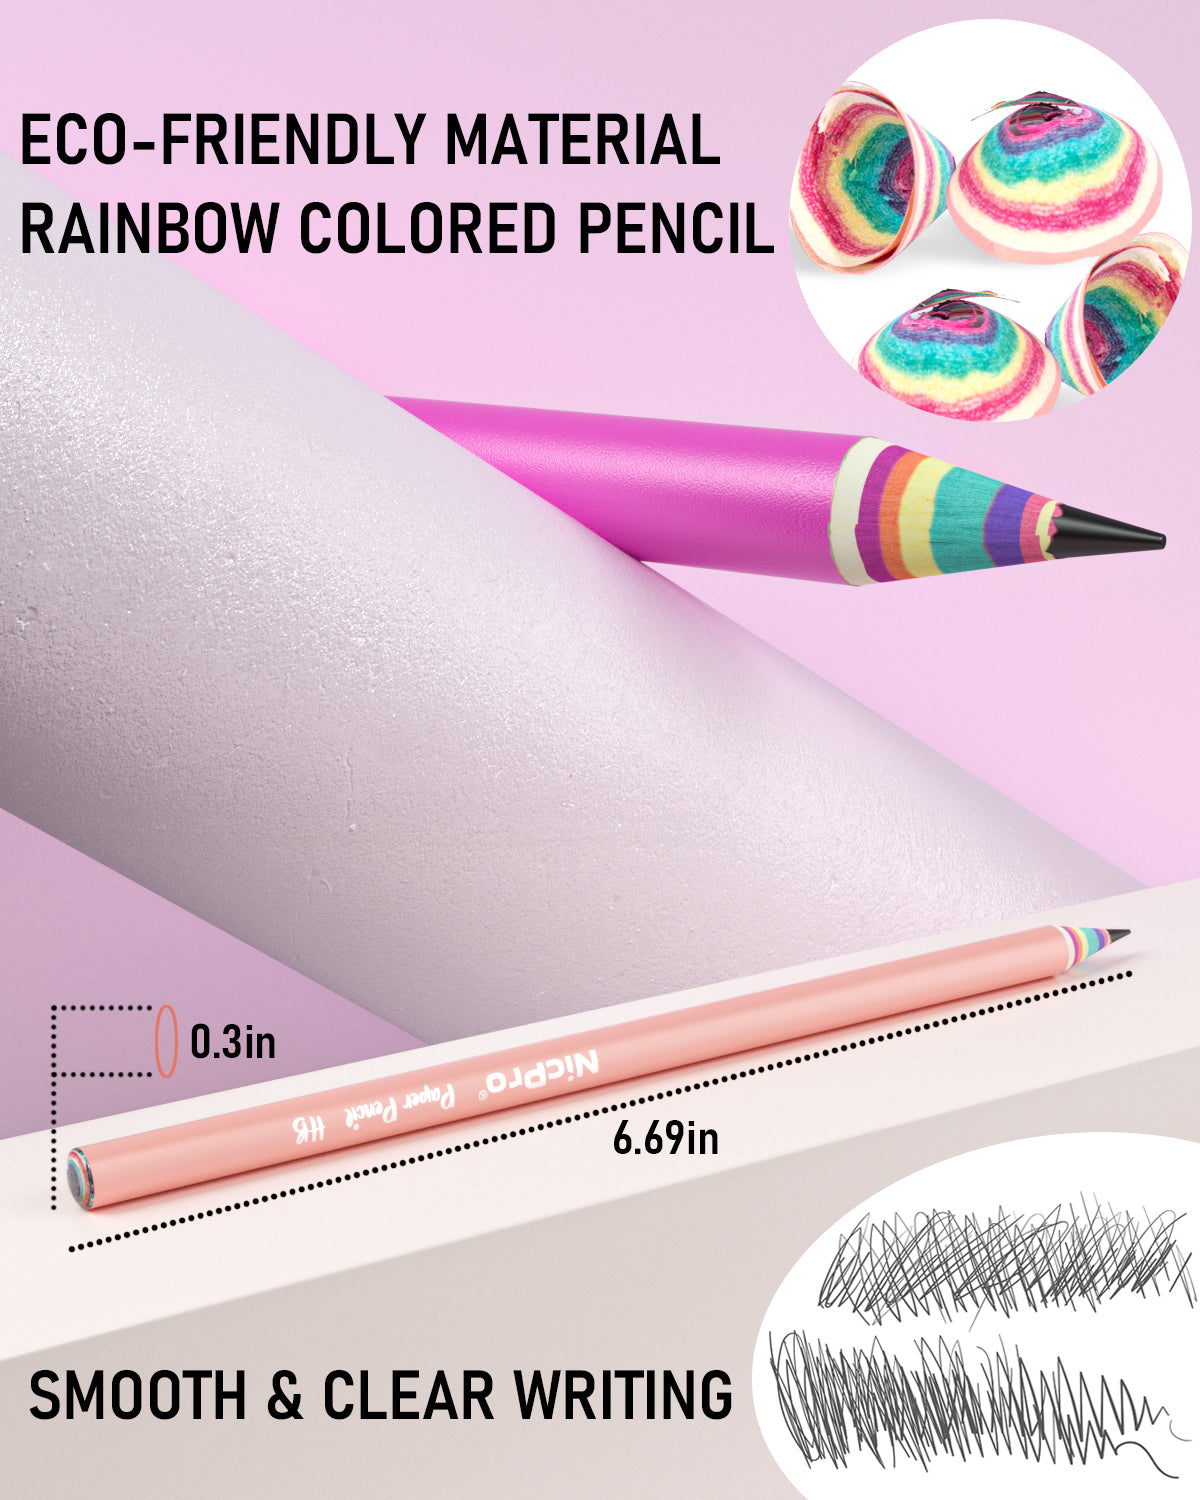 Nicpro 24PCS Rainbow Pencils HB #2, Cute Pastel Pencils Pre-Sharpened Wooden Pencils, Break-Resistant & Eco-friendly Recycled Paper Pencil For Kids Student Drawing Writing, School Supplies, 6 Colors